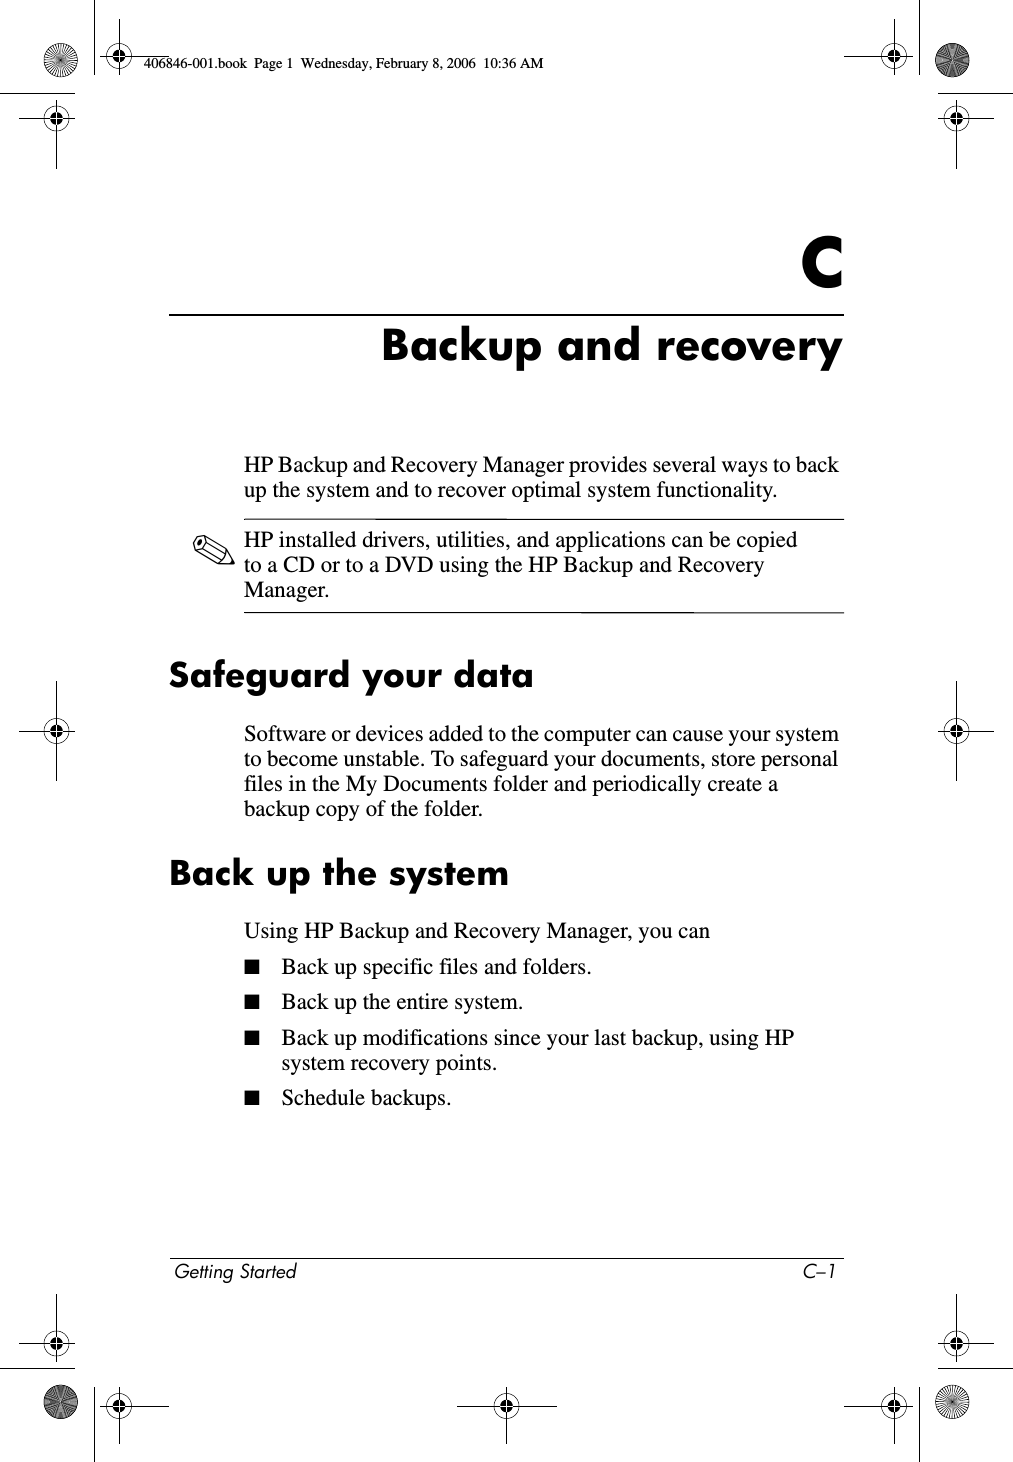 Getting Started C–1CBackup and recoveryHP Backup and Recovery Manager provides several ways to back up the system and to recover optimal system functionality. ✎HP installed drivers, utilities, and applications can be copied to a CD or to a DVD using the HP Backup and Recovery Manager.Safeguard your dataSoftware or devices added to the computer can cause your system to become unstable. To safeguard your documents, store personal files in the My Documents folder and periodically create a backup copy of the folder.Back up the systemUsing HP Backup and Recovery Manager, you can■Back up specific files and folders. ■Back up the entire system. ■Back up modifications since your last backup, using HP system recovery points. ■Schedule backups.406846-001.book  Page 1  Wednesday, February 8, 2006  10:36 AM